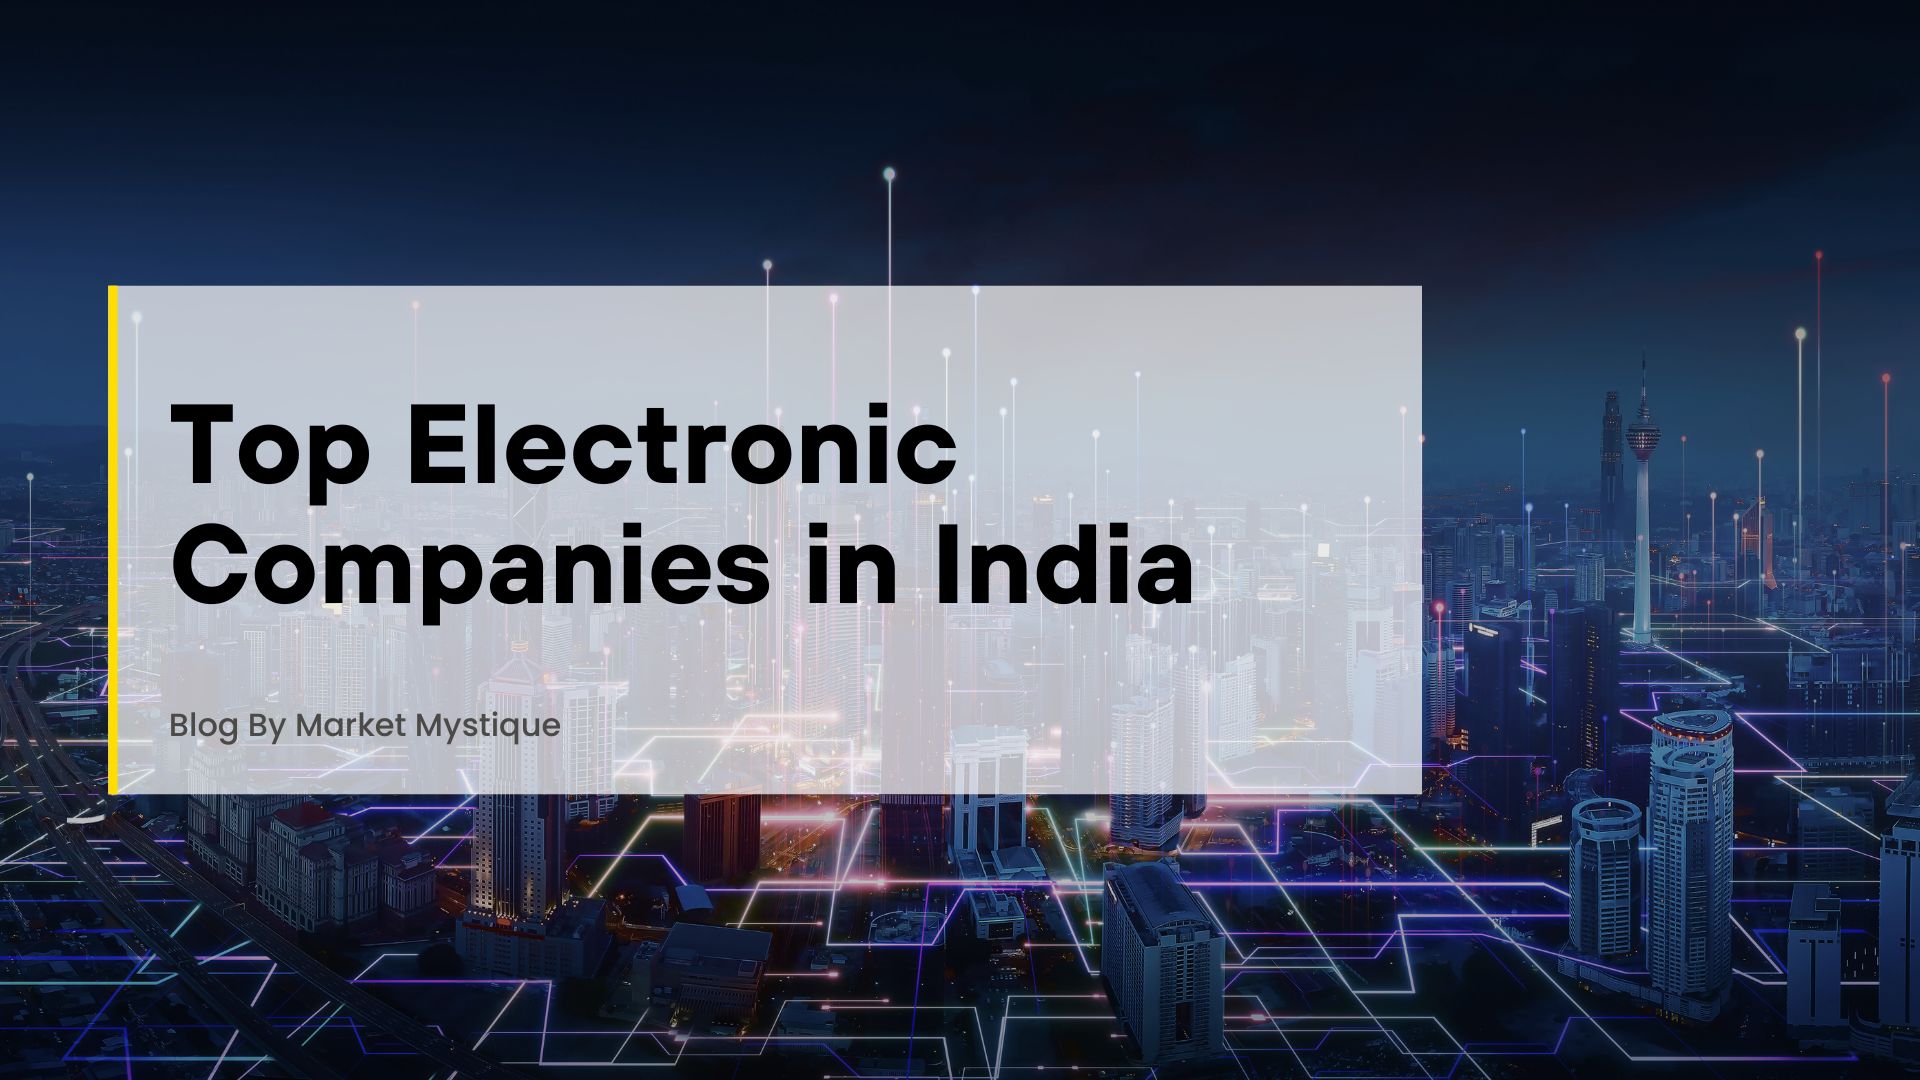 Top Electronic Companies in India